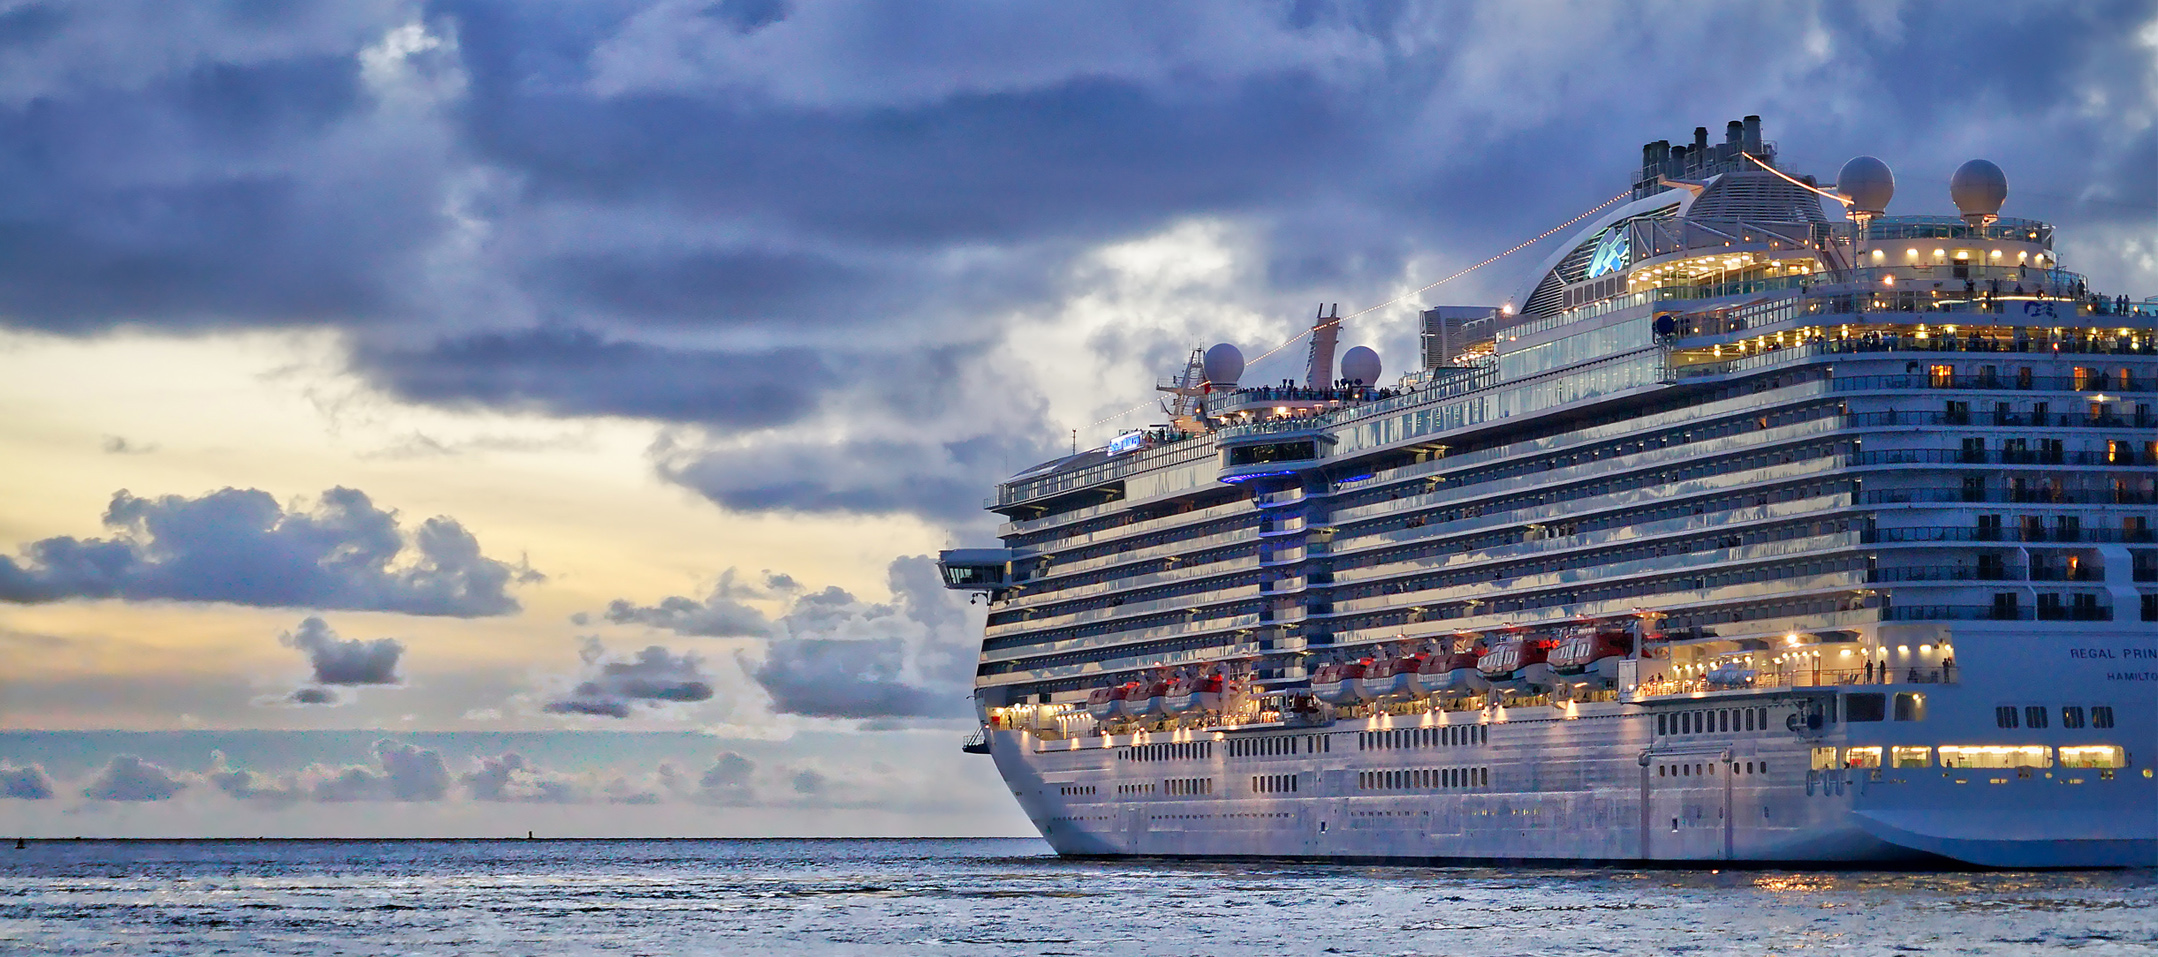 Side view of large cruise ship